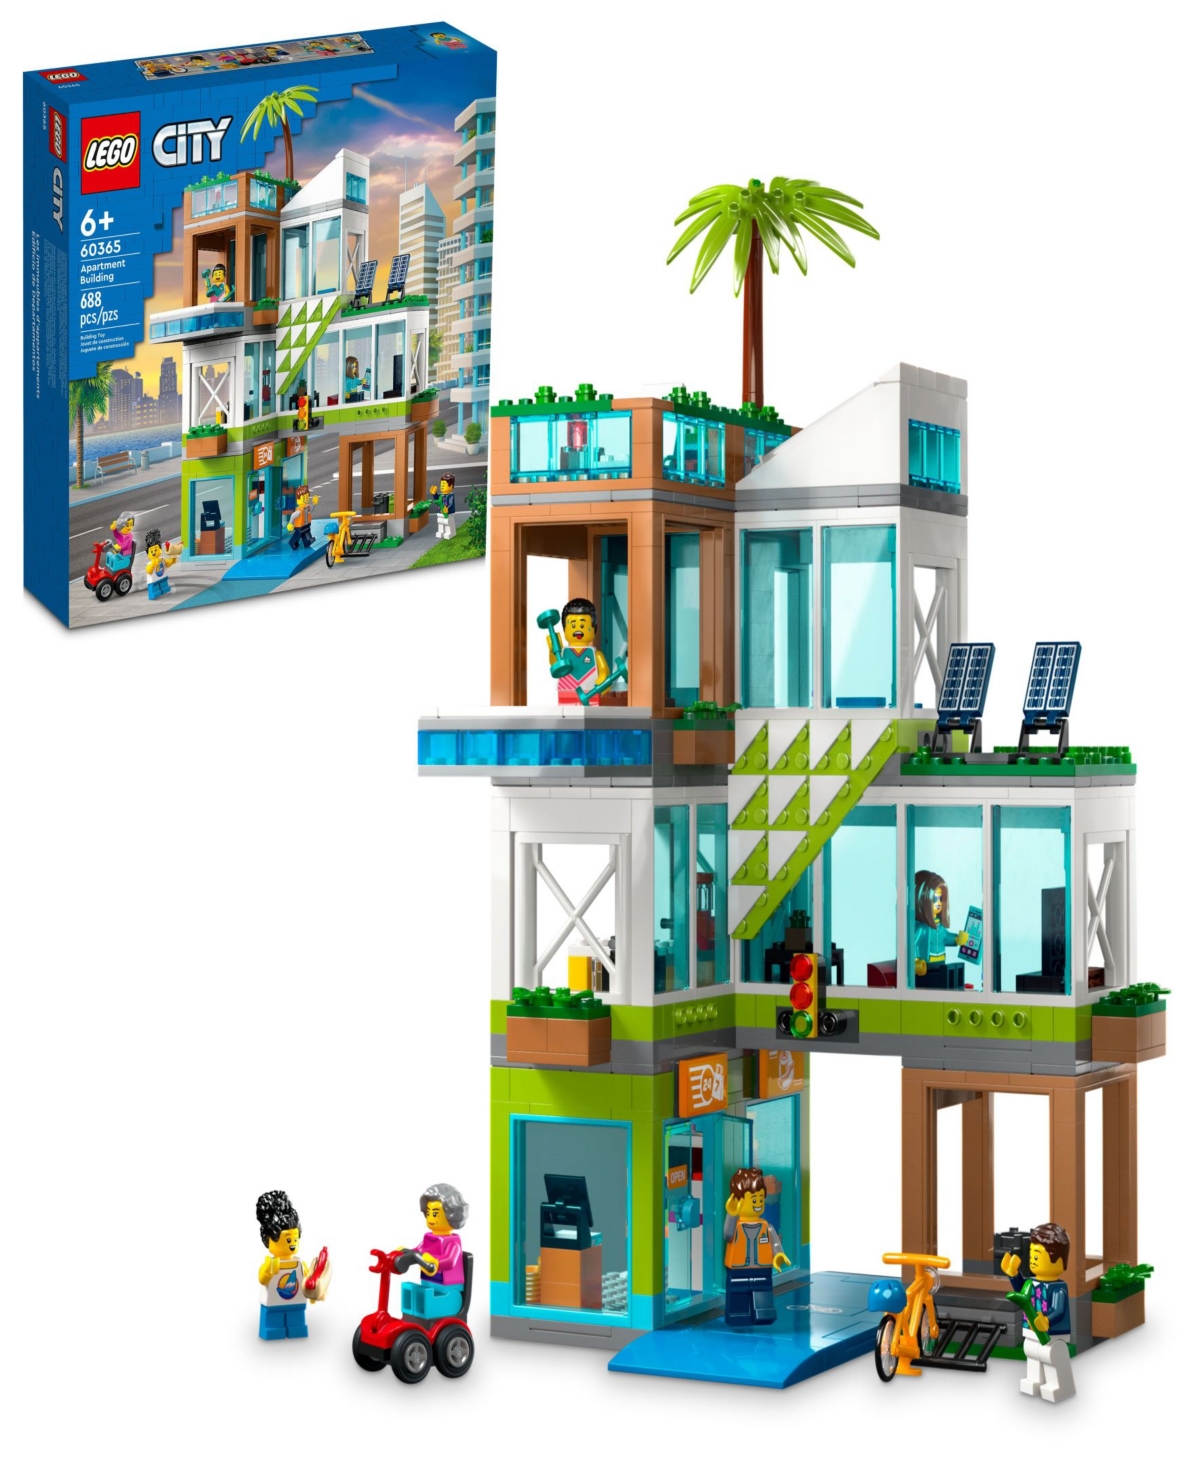 Lego Kids' City Apartment Building Fun Toy Set With Connecting Room Modules 60365 In Multicolor